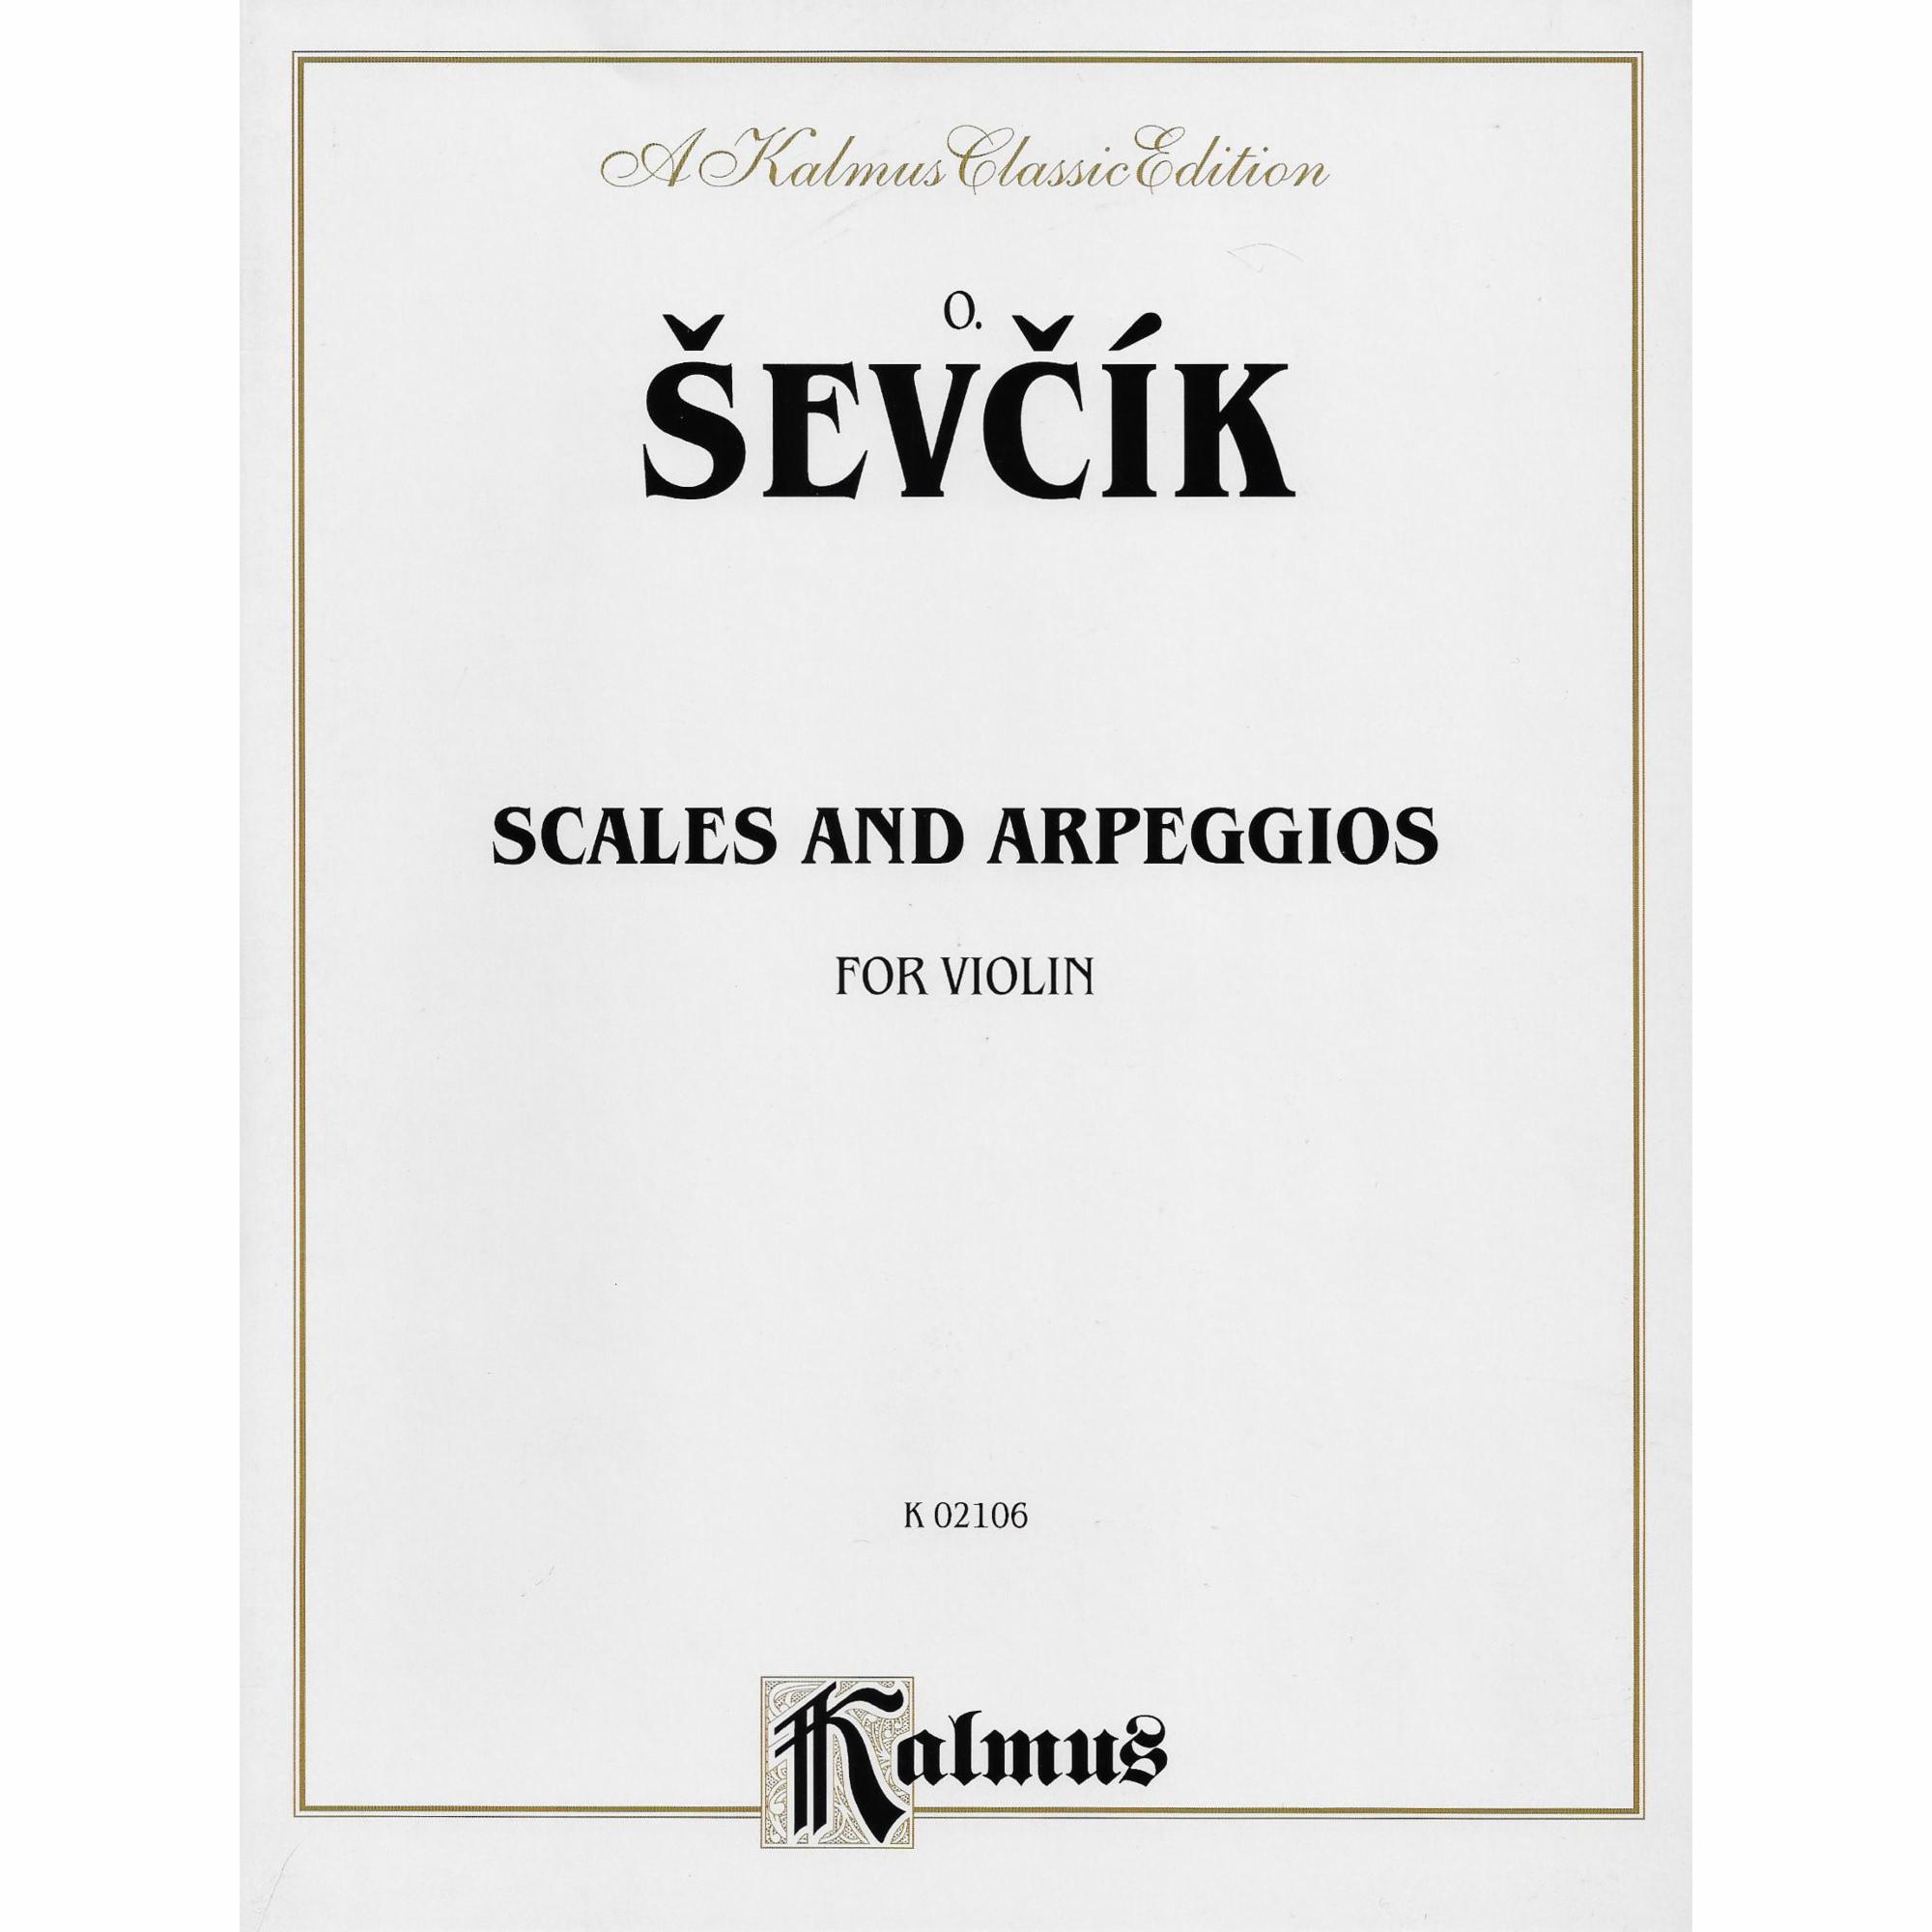 Sevcik -- Scales and Arpeggios for Violin